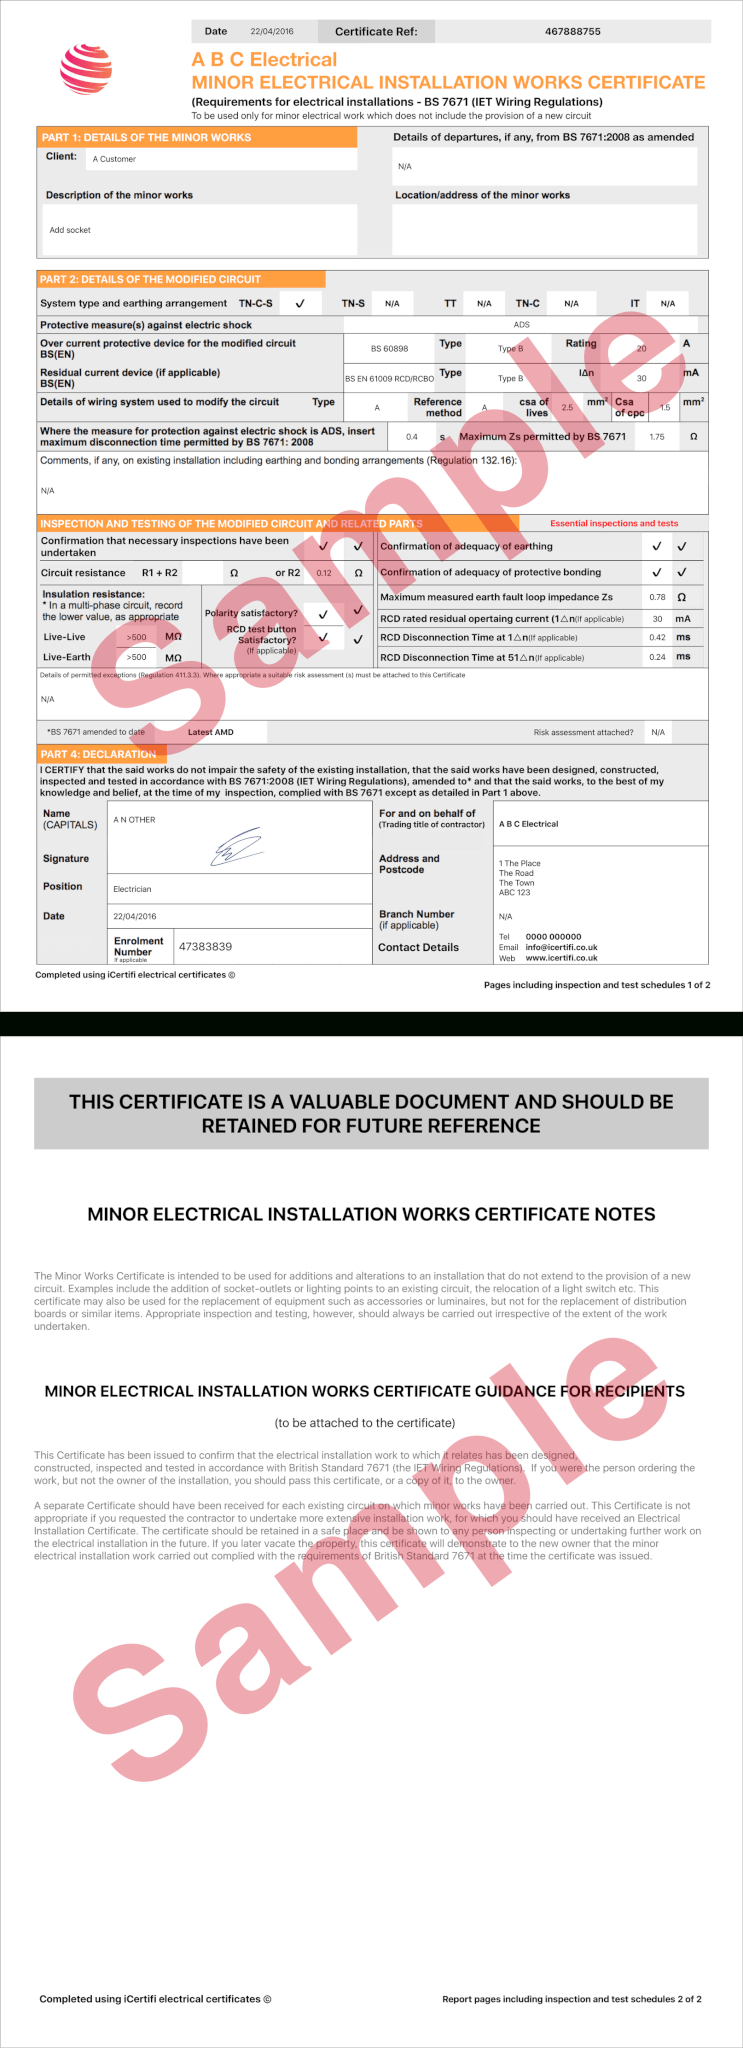 Electrical Certificate - Example Minor Works Certificate With Regard To Electrical Minor Works Certificate Template